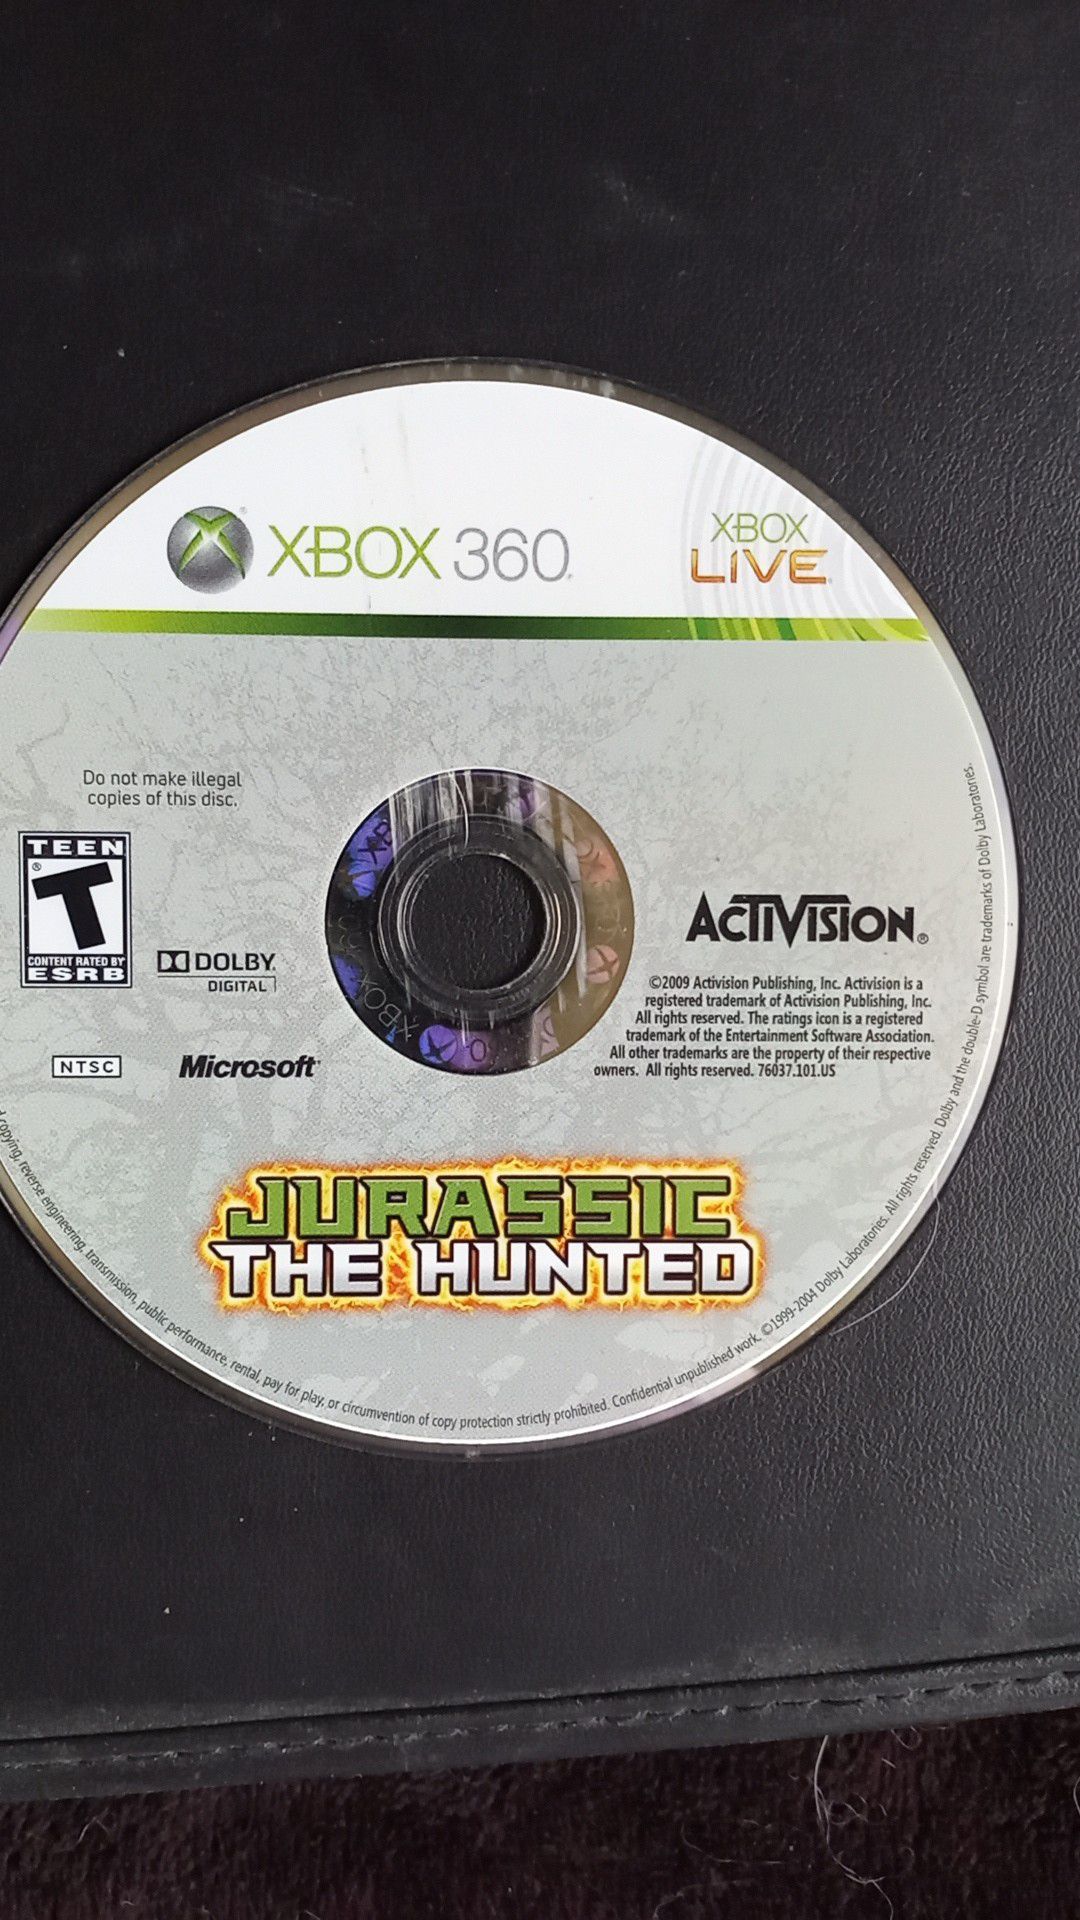 Jurassic the hunted Xbox 360 hard game to find but fun game to play if you still have a Xbox 360